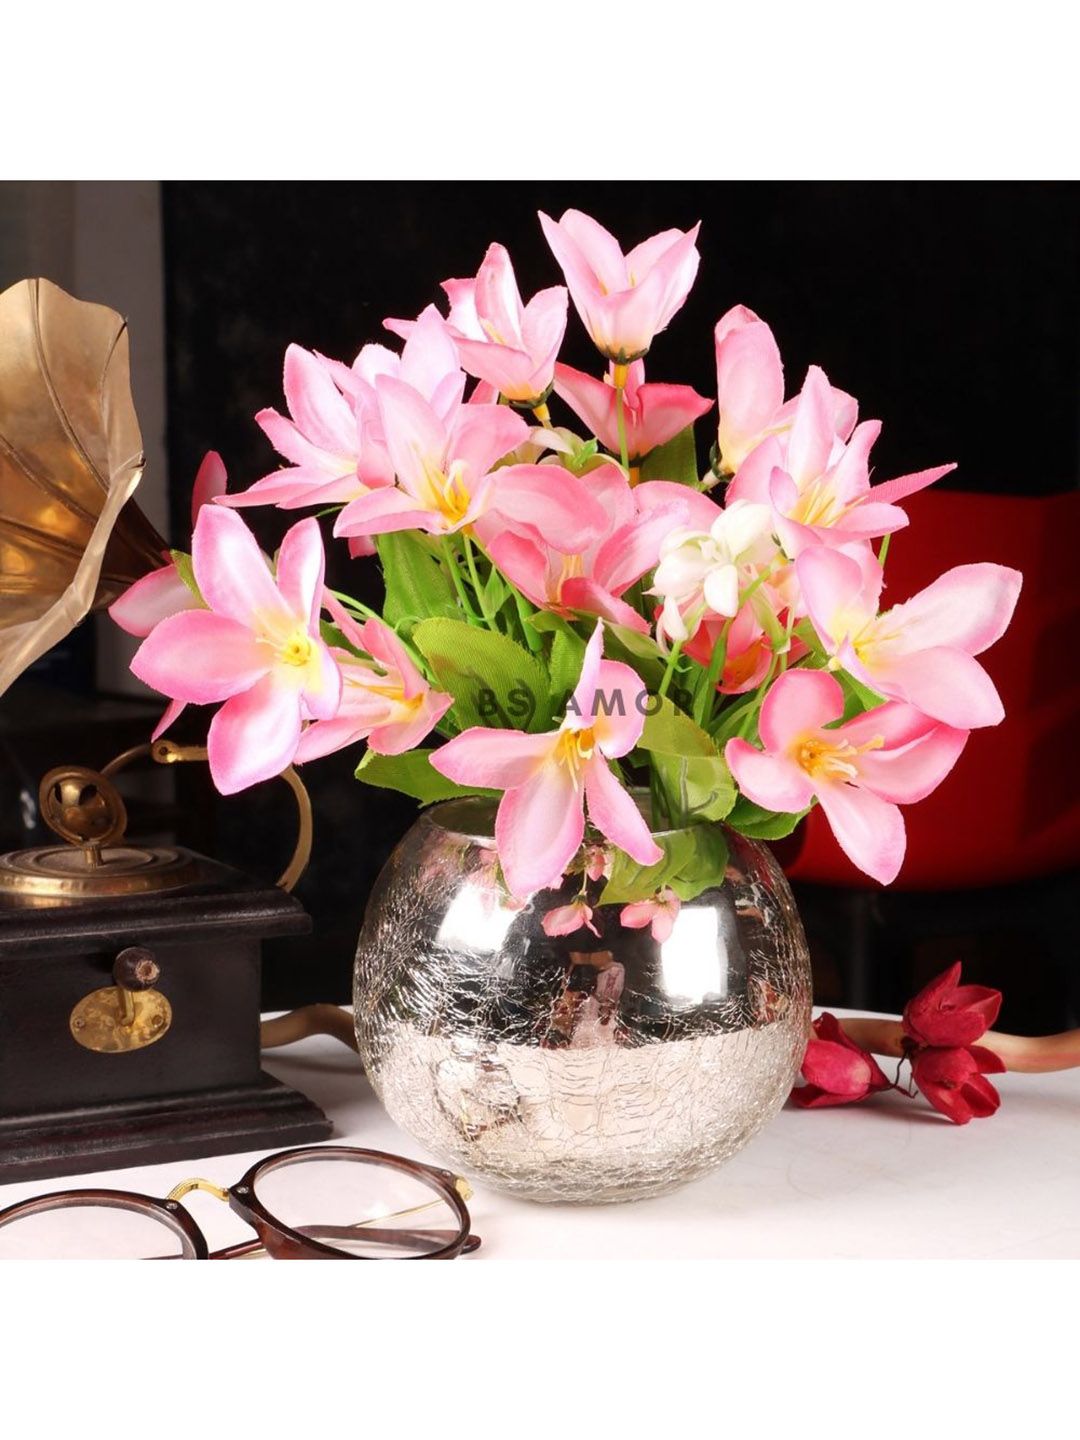 BS AMOR Pink & Silver Toned Textured Glass Artificial Flowers With Vase Price in India